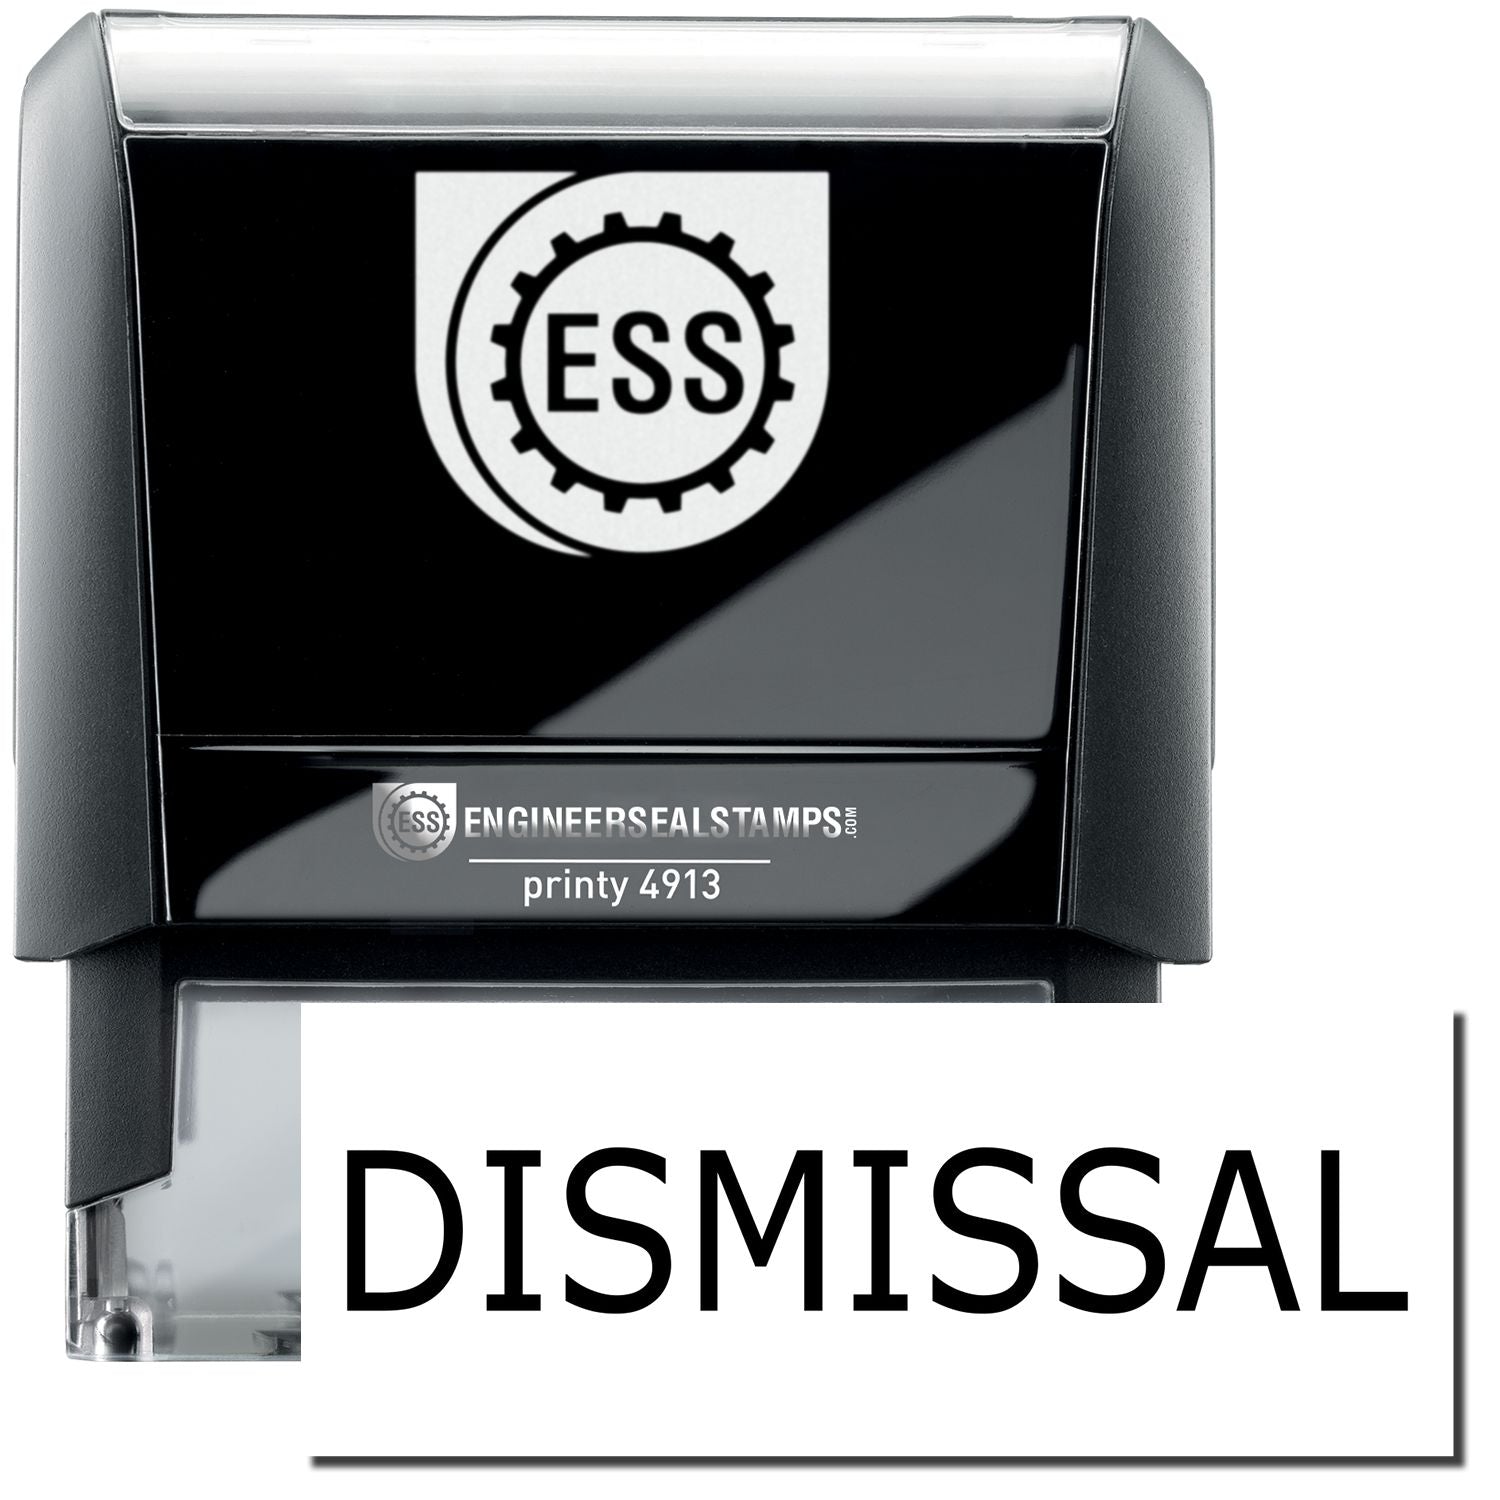 A self-inking stamp with a stamped image showing how the text "DISMISSAL" in a large bold font is displayed by it.